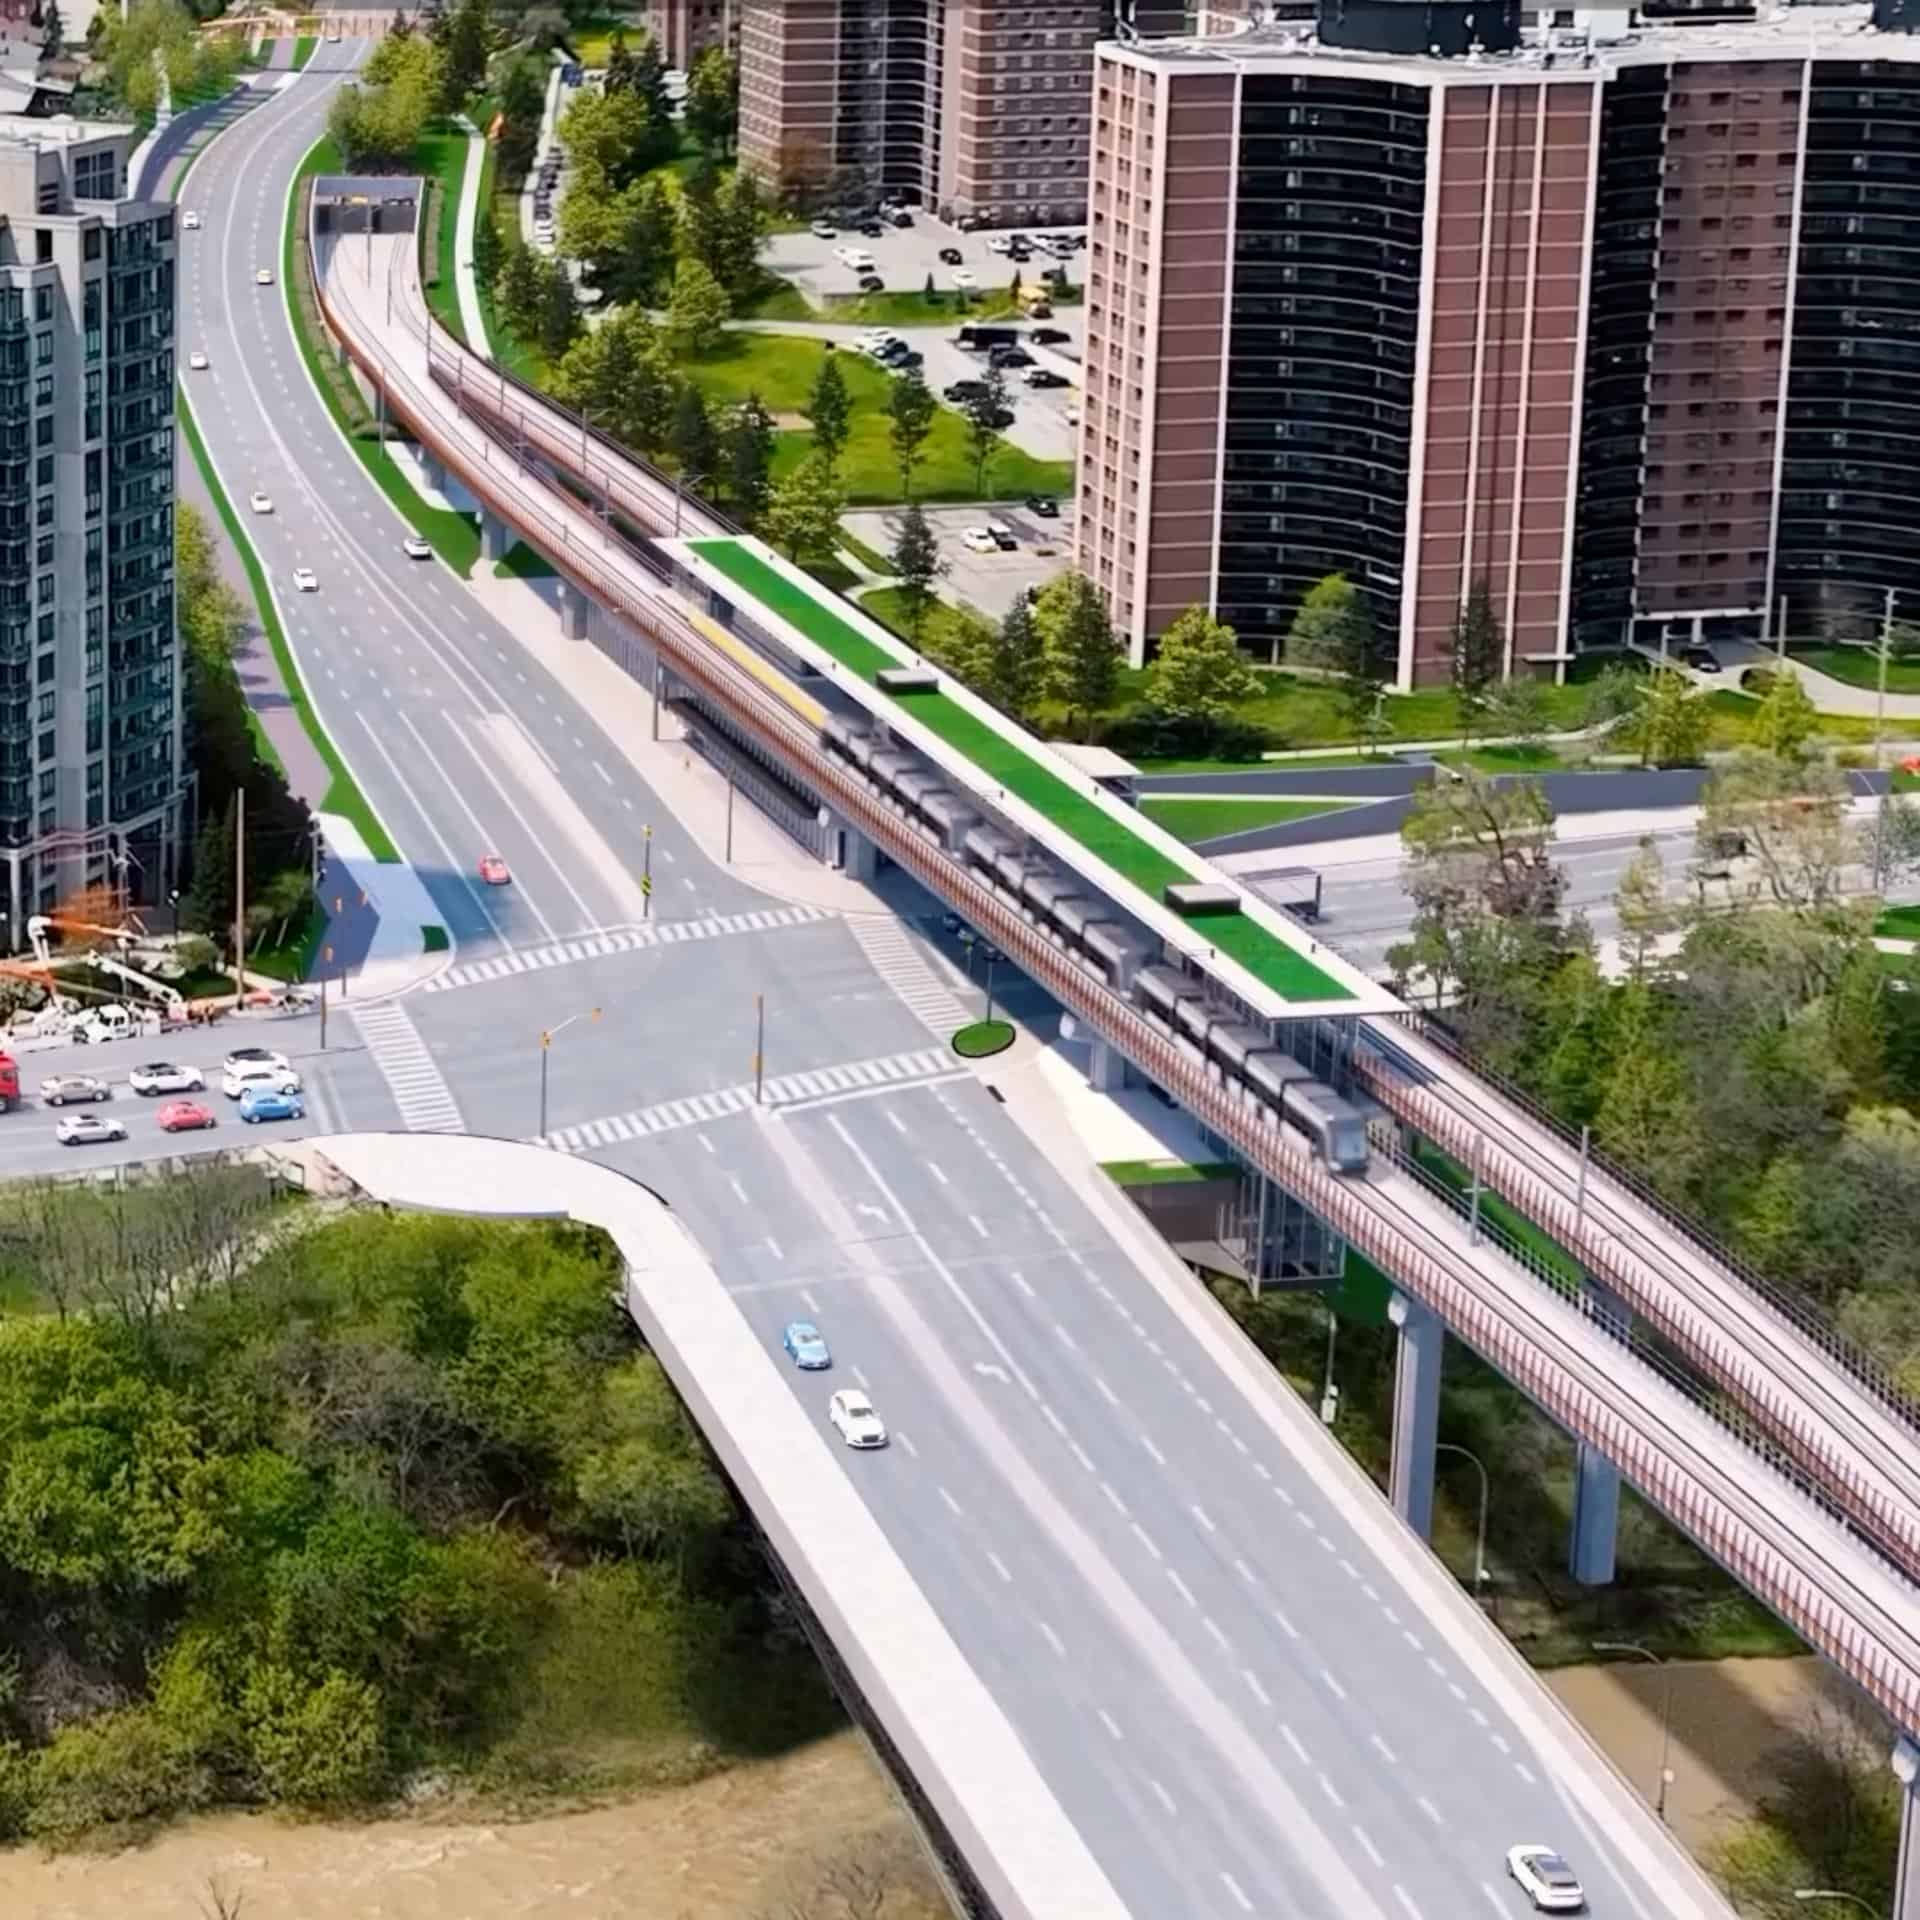 Sneak peek at what part of LRT line in Mississauga will look like.